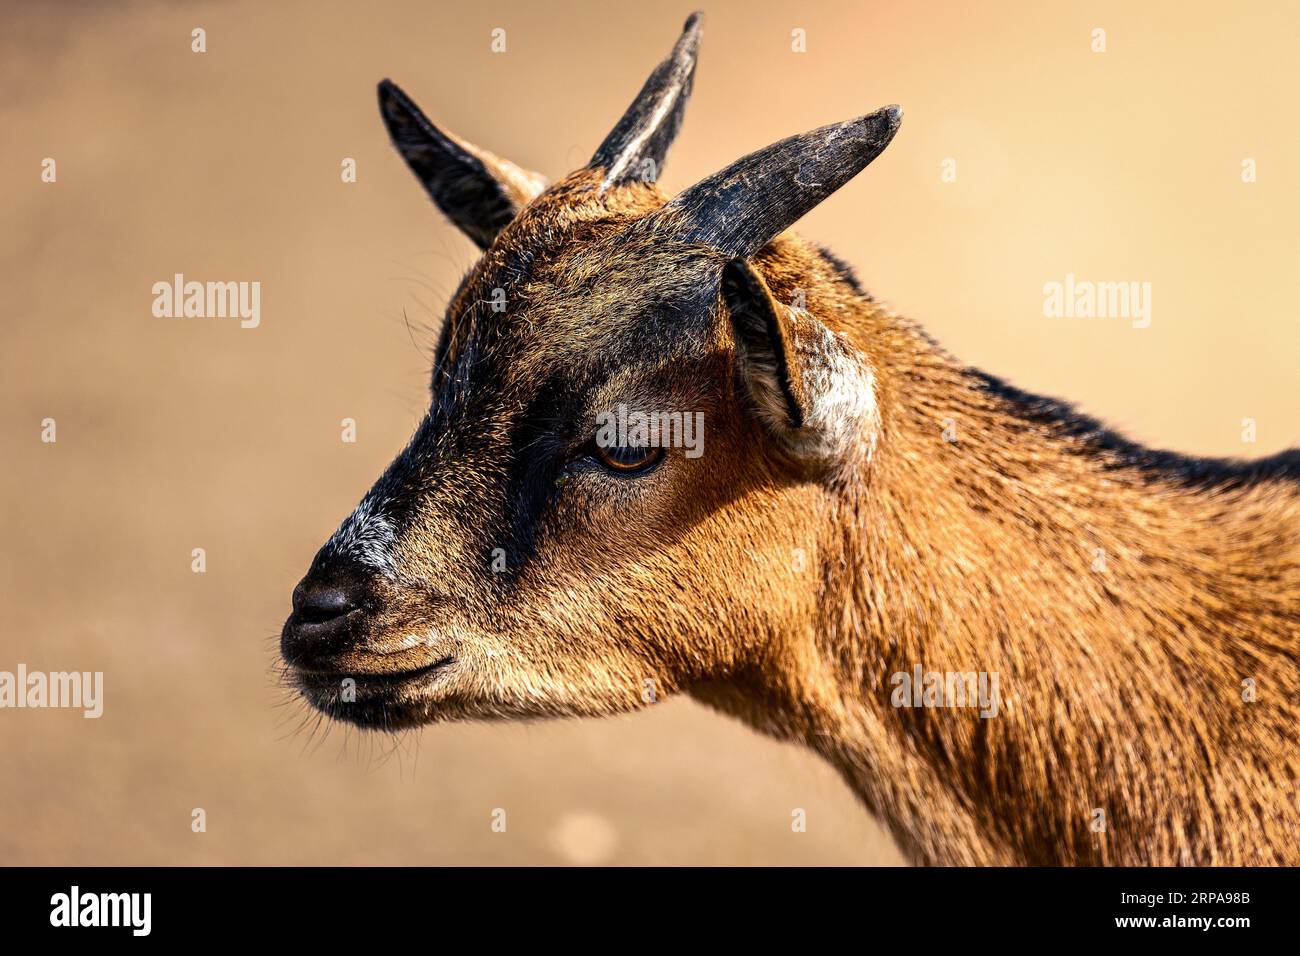 A white goat stands in a desert landscape, its horns pointing forward as it surveys its surroundings Stock Photo